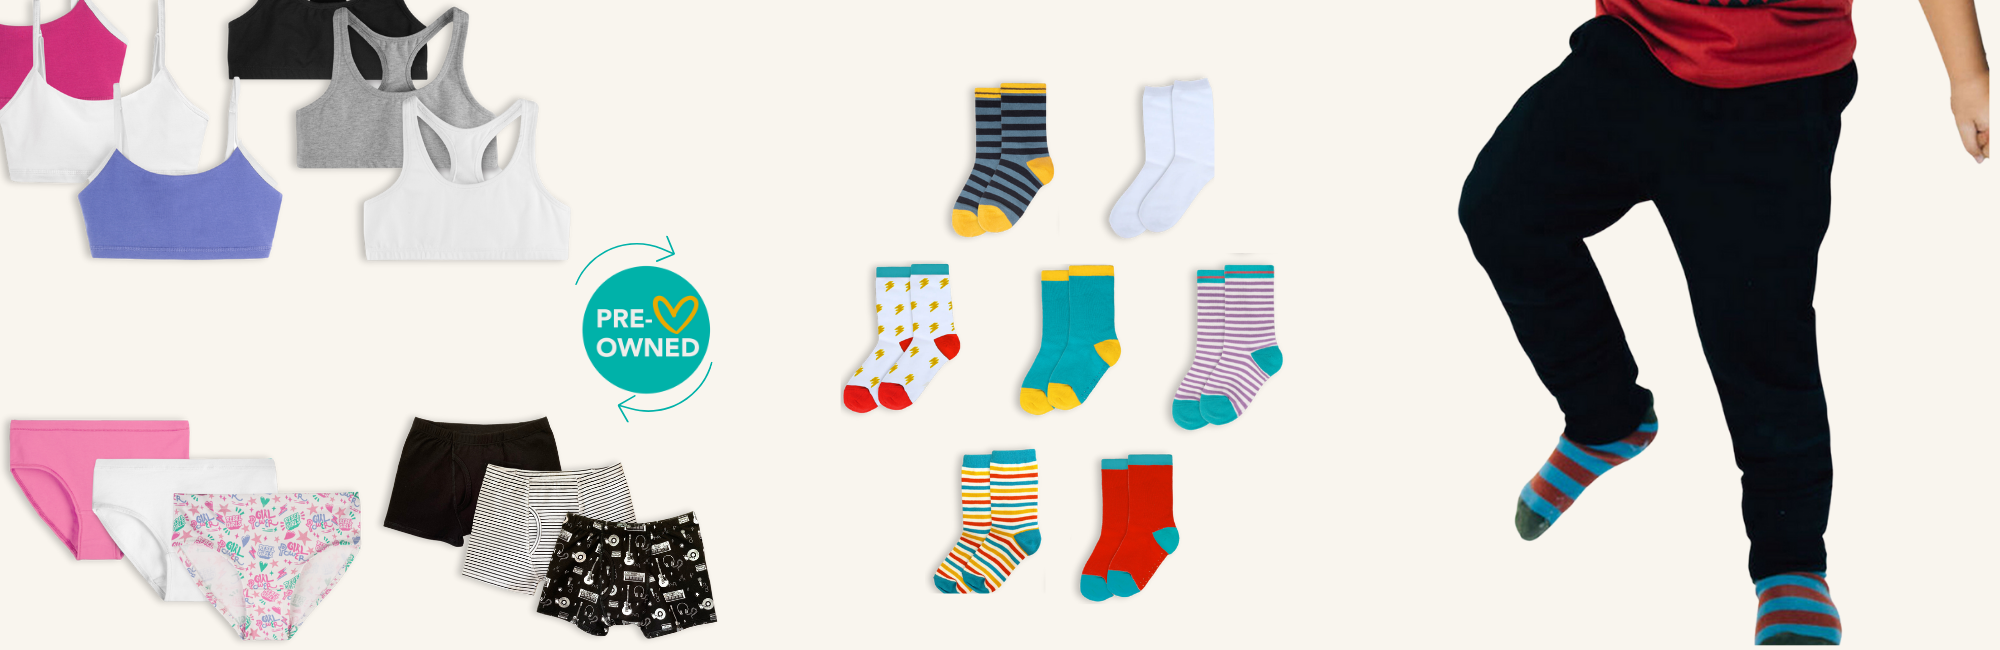 Boys Socks & Underwear - New Without Packaging